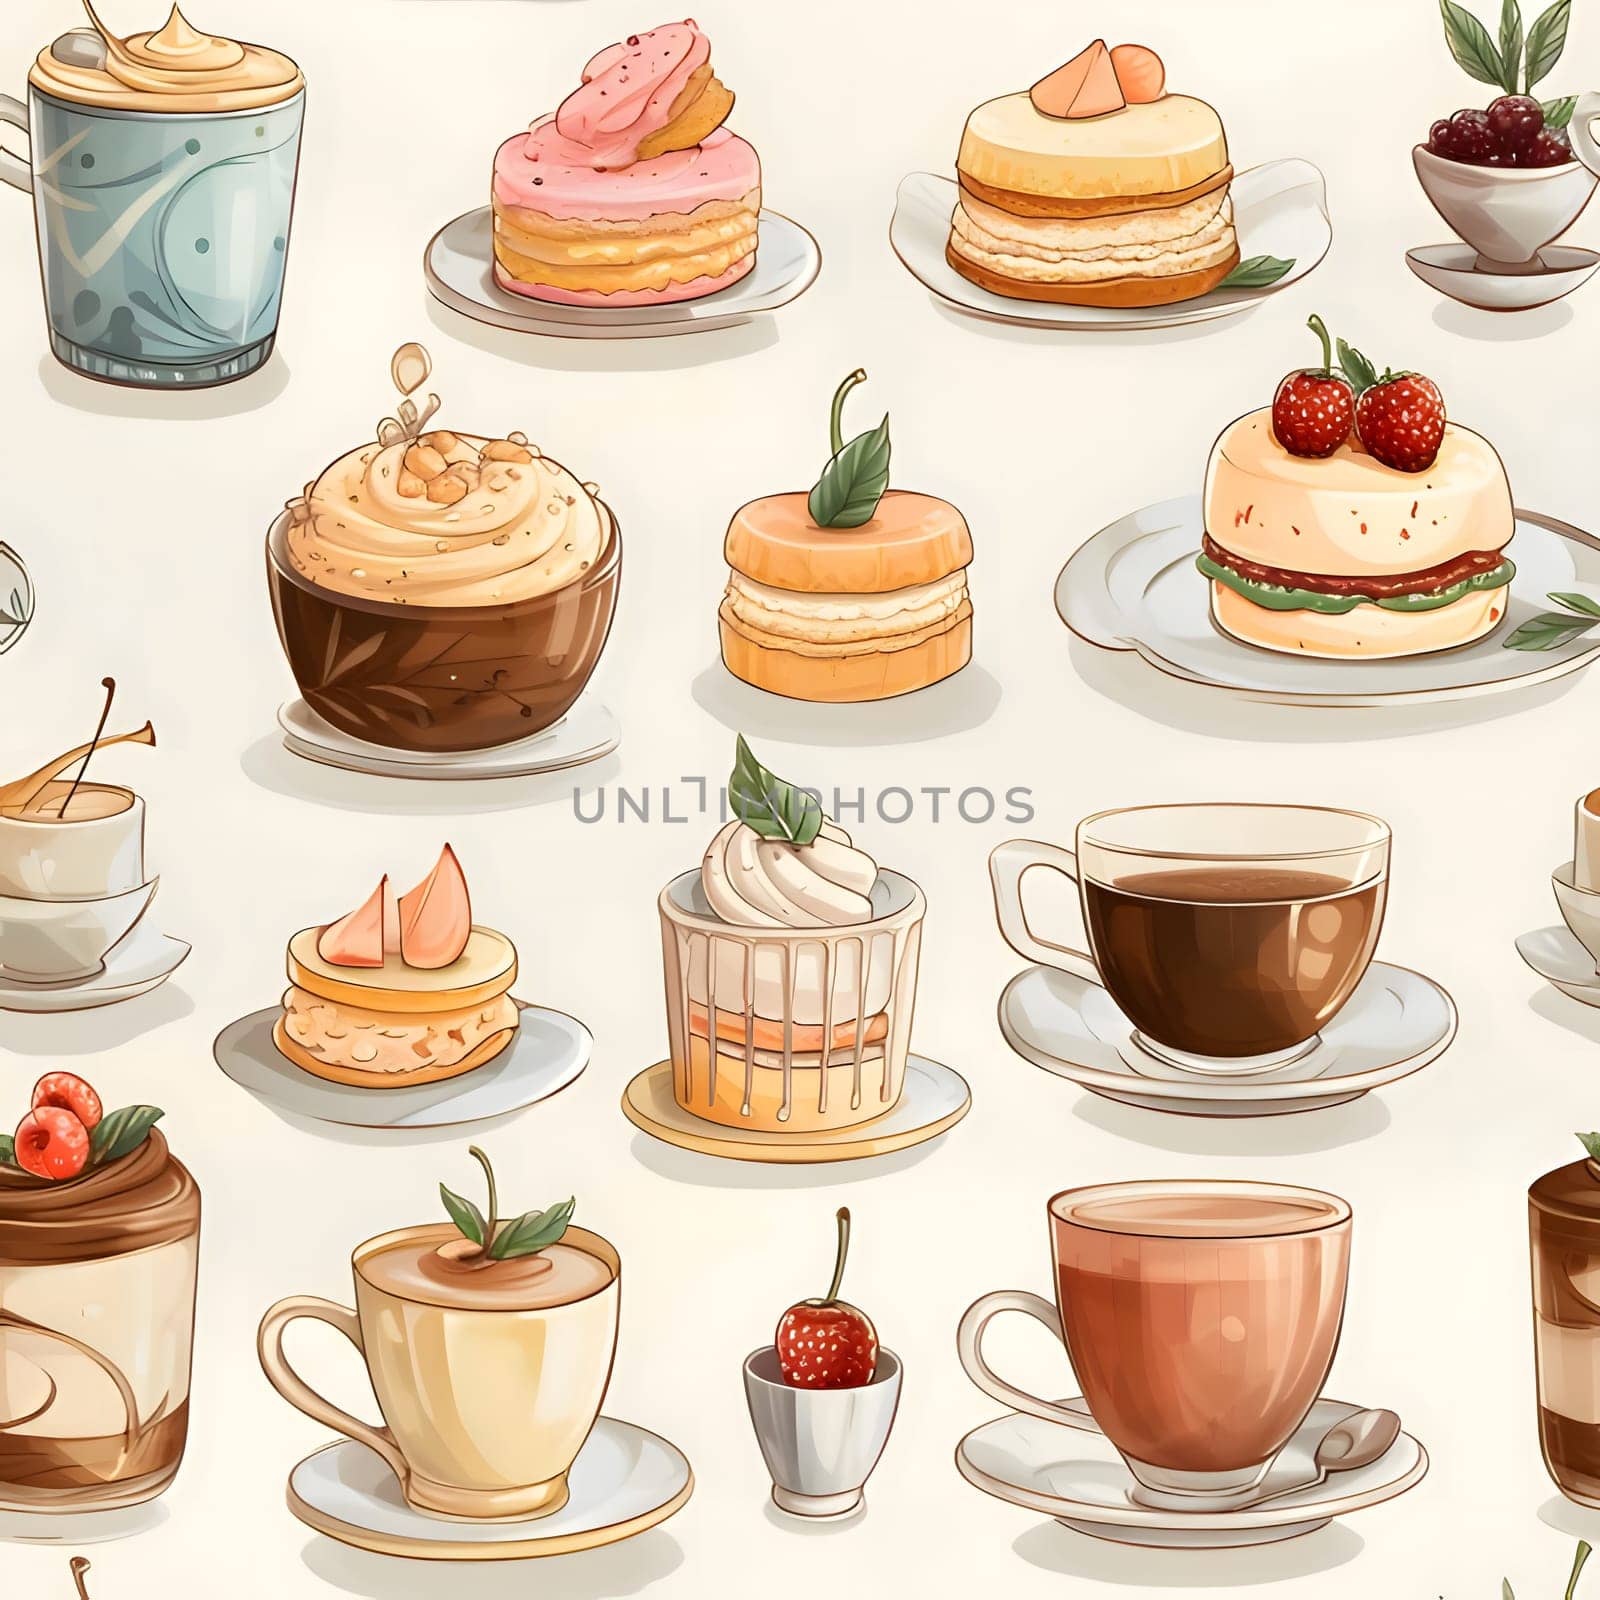 Patterns and banners backgrounds: Seamless pattern with coffee cups, macaroons, cakes and strawberries.